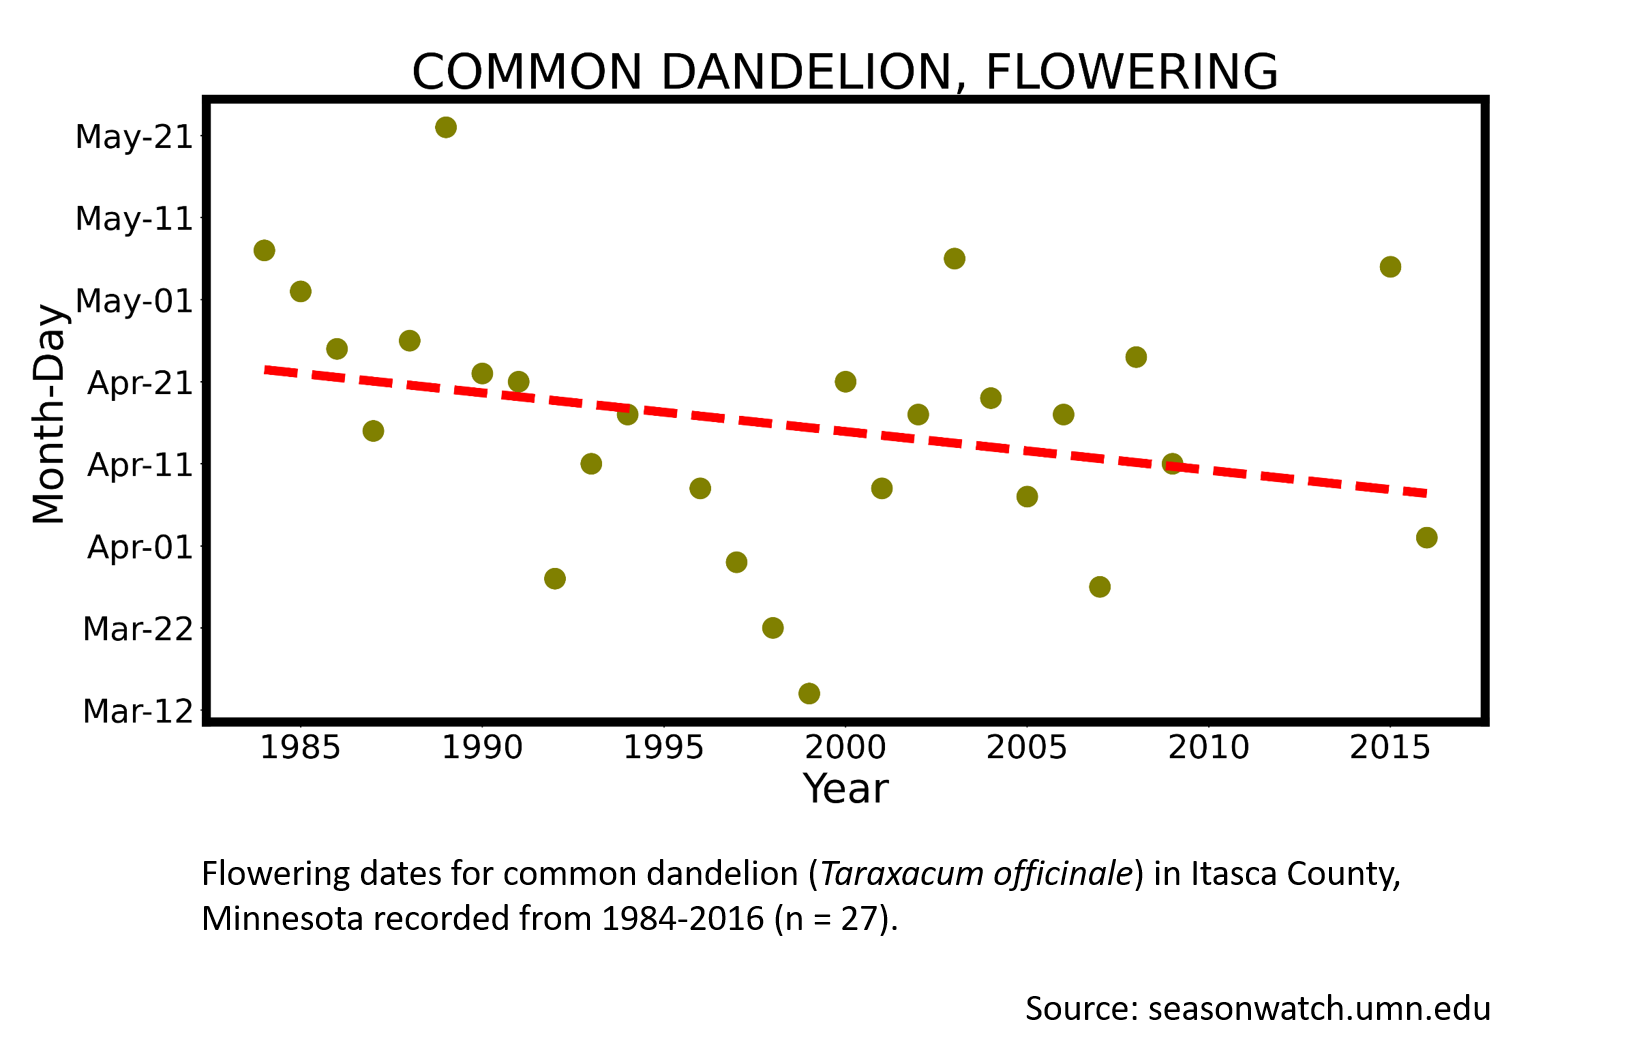 Scatterplot showing common dandelion phenology observations in Itasca County, Minnesota